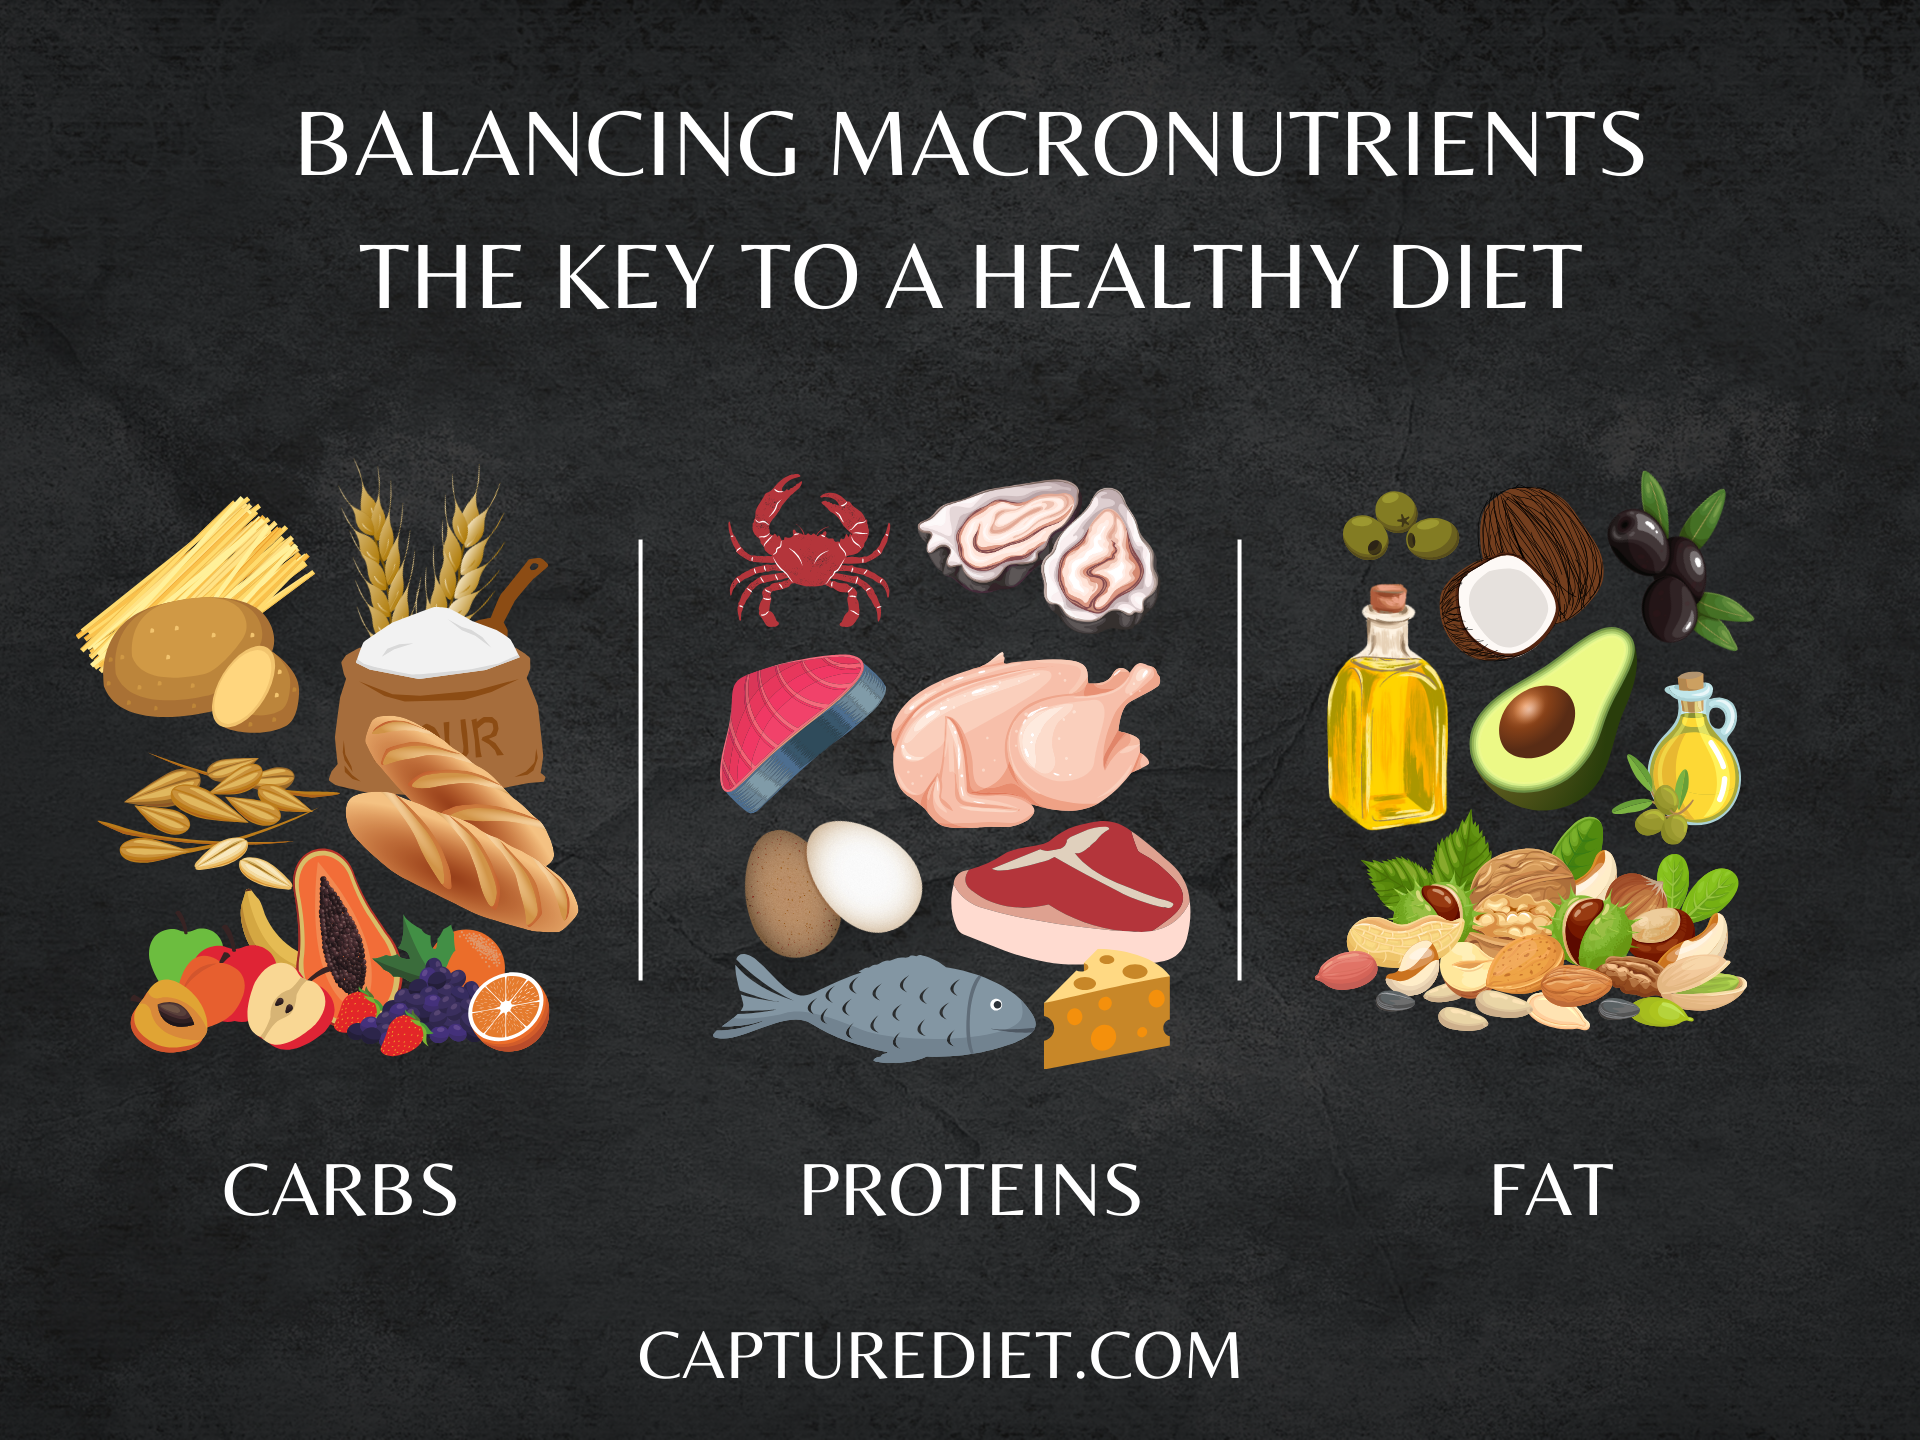 Balancing Macronutrients: The Key to a Healthy Diet